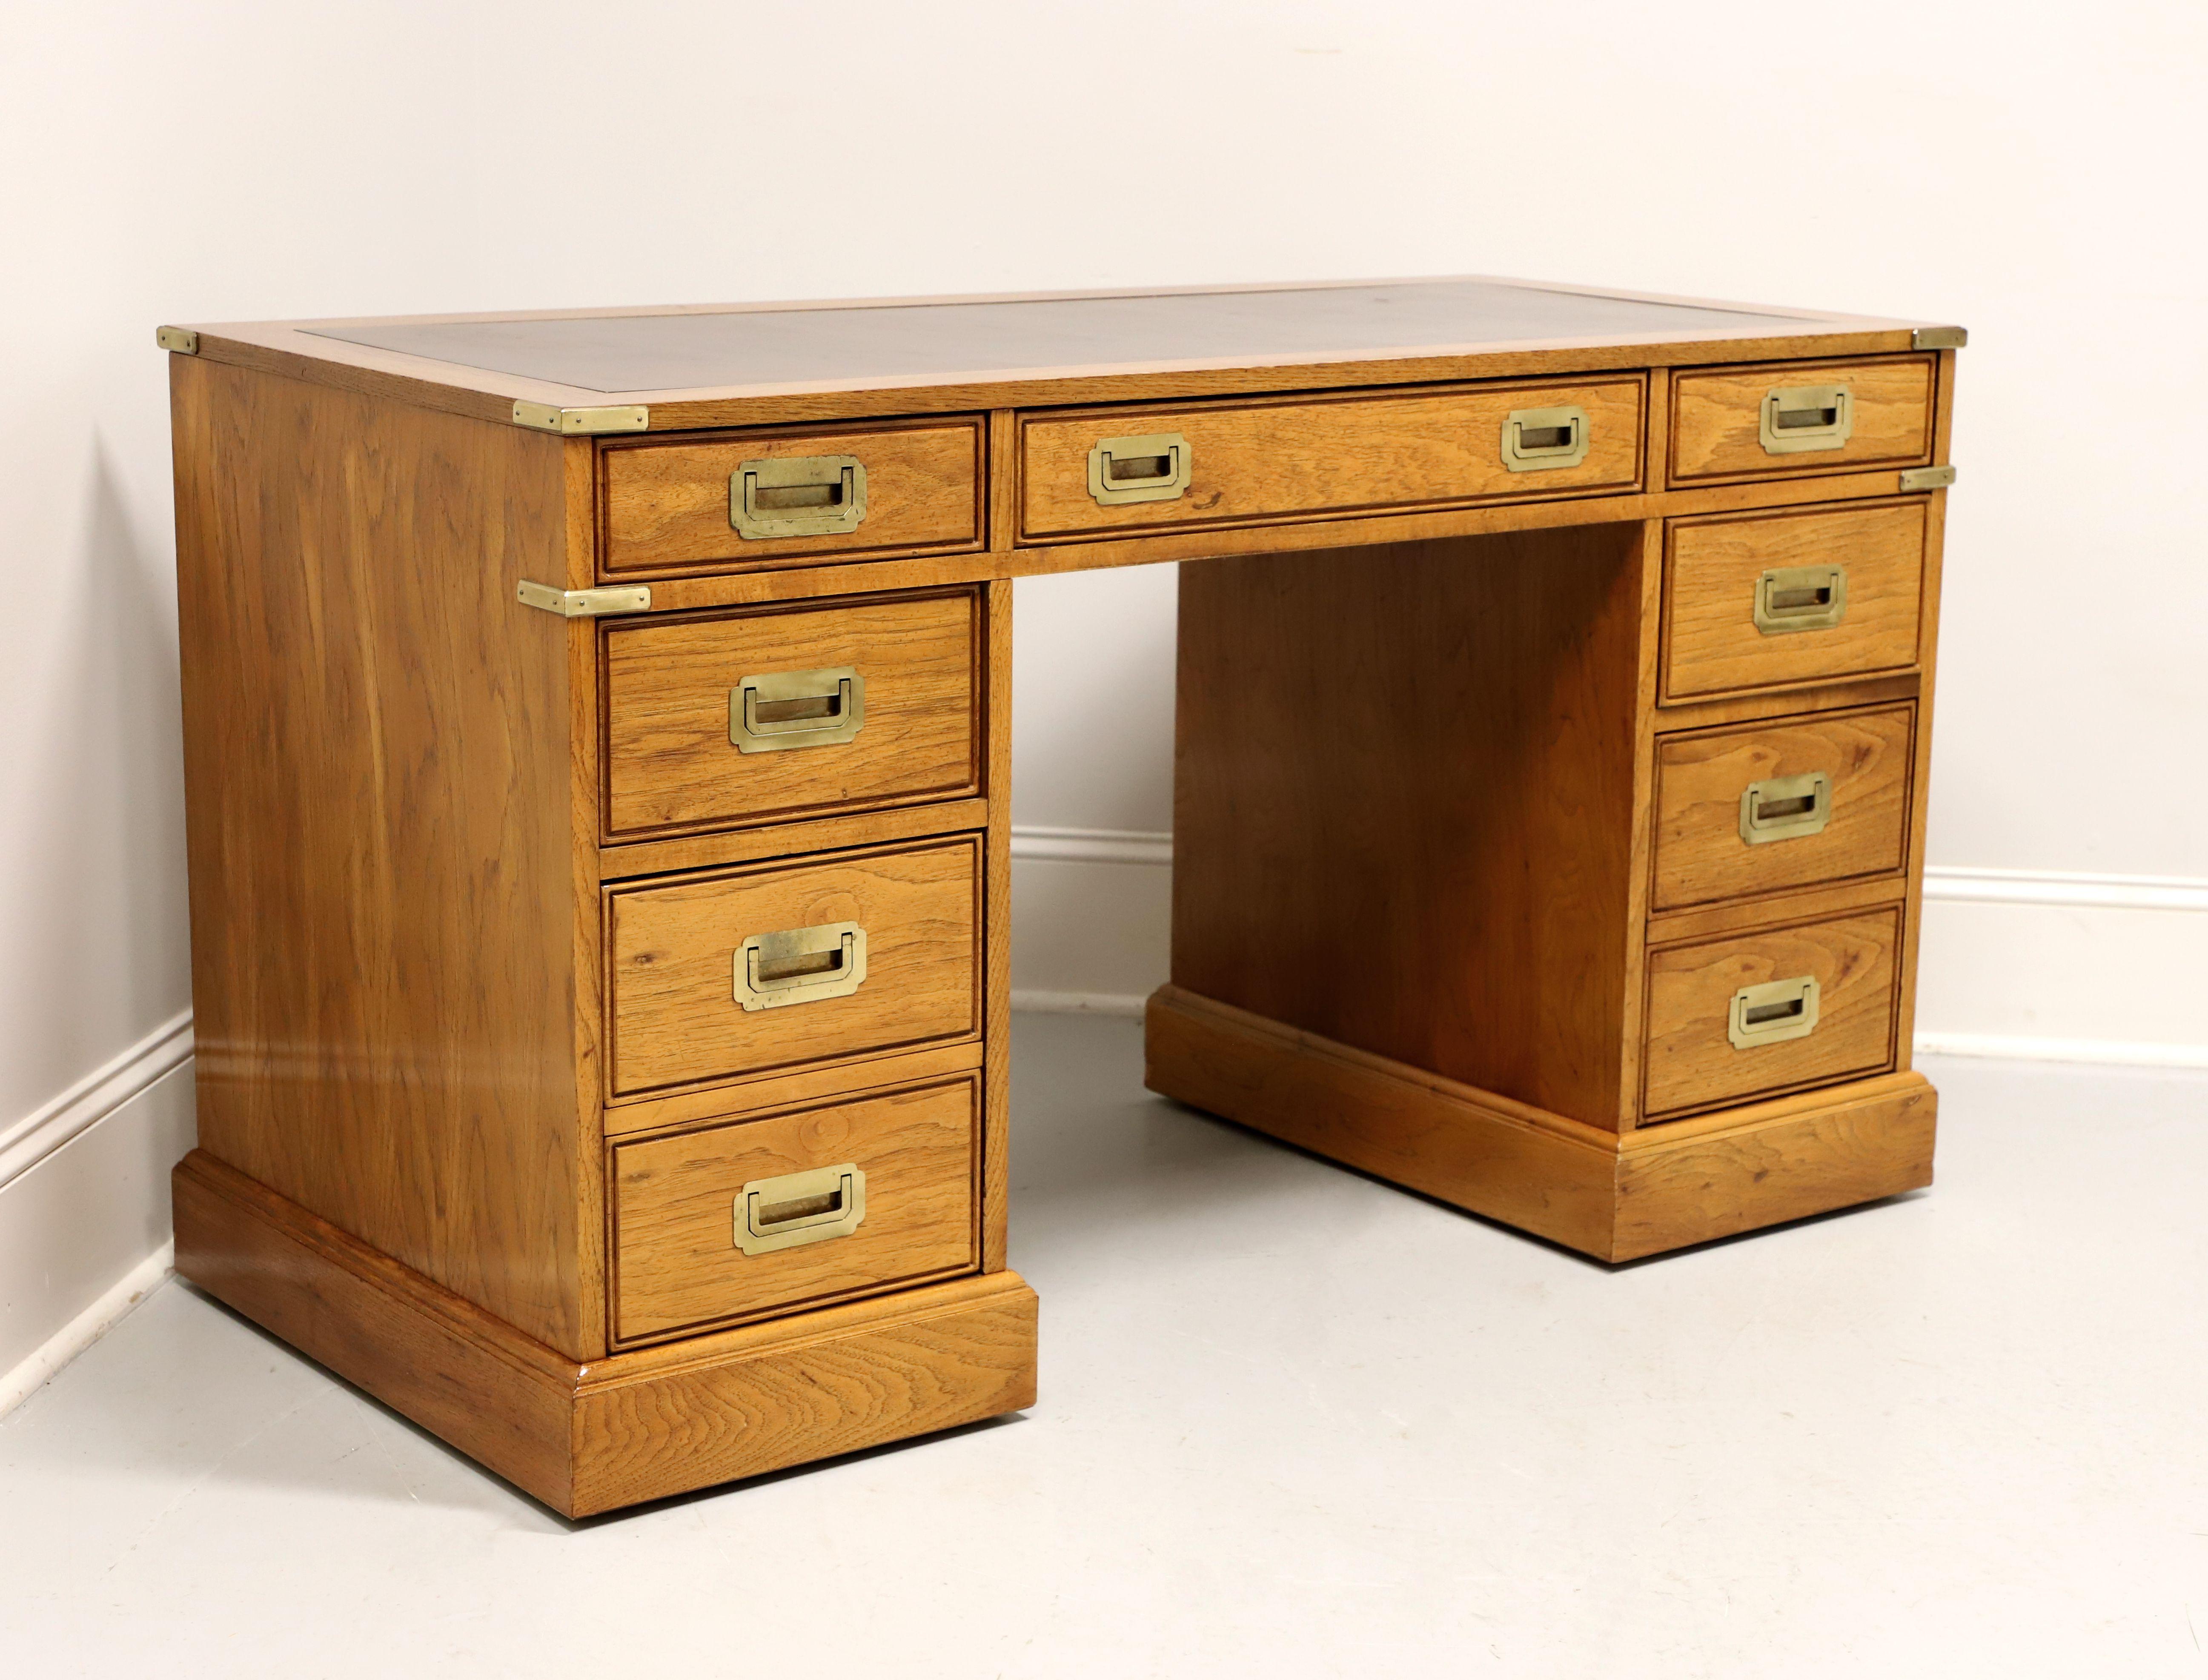 NATIONAL MT. AIRY Oak Campaign Style Kneehole Desk with Leather Writing Surface 4